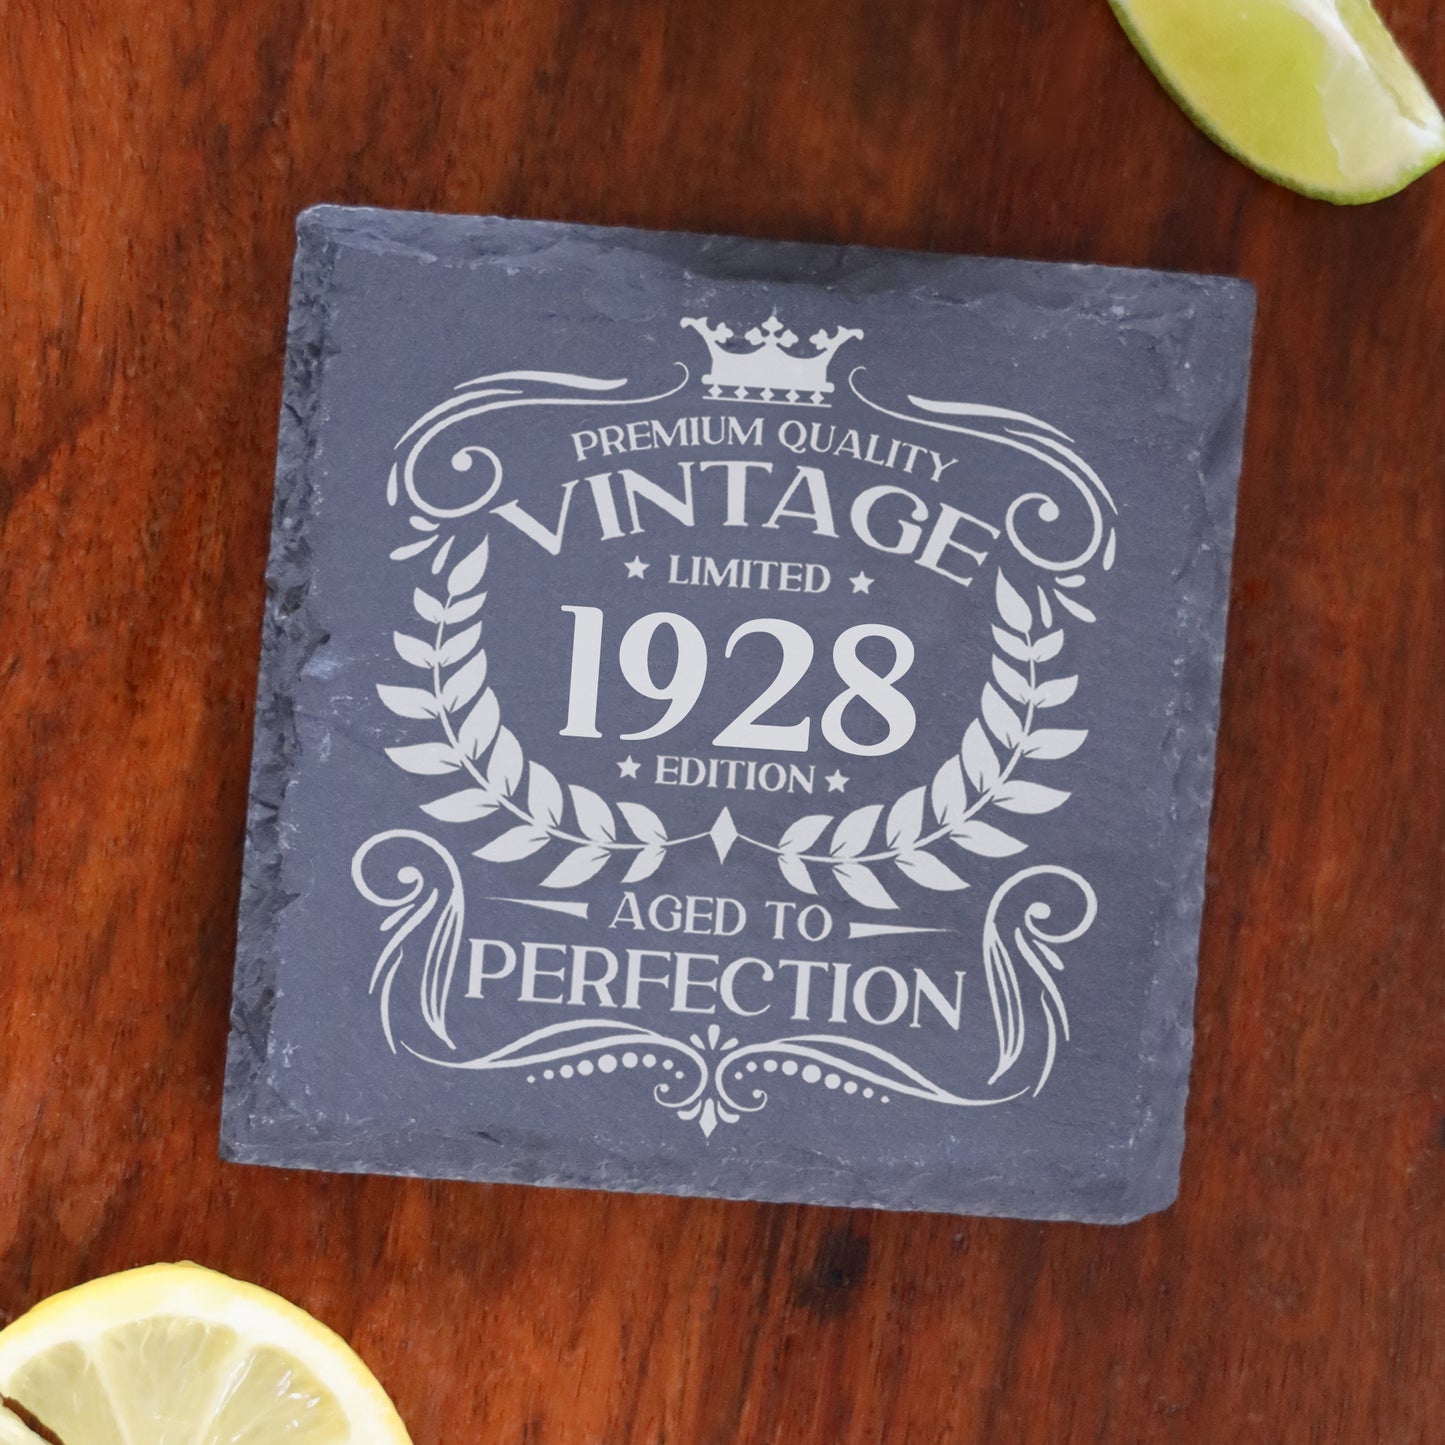 Vintage 1928 95th Birthday Engraved Gin Glass Gift  - Always Looking Good - Square Coaster Only  